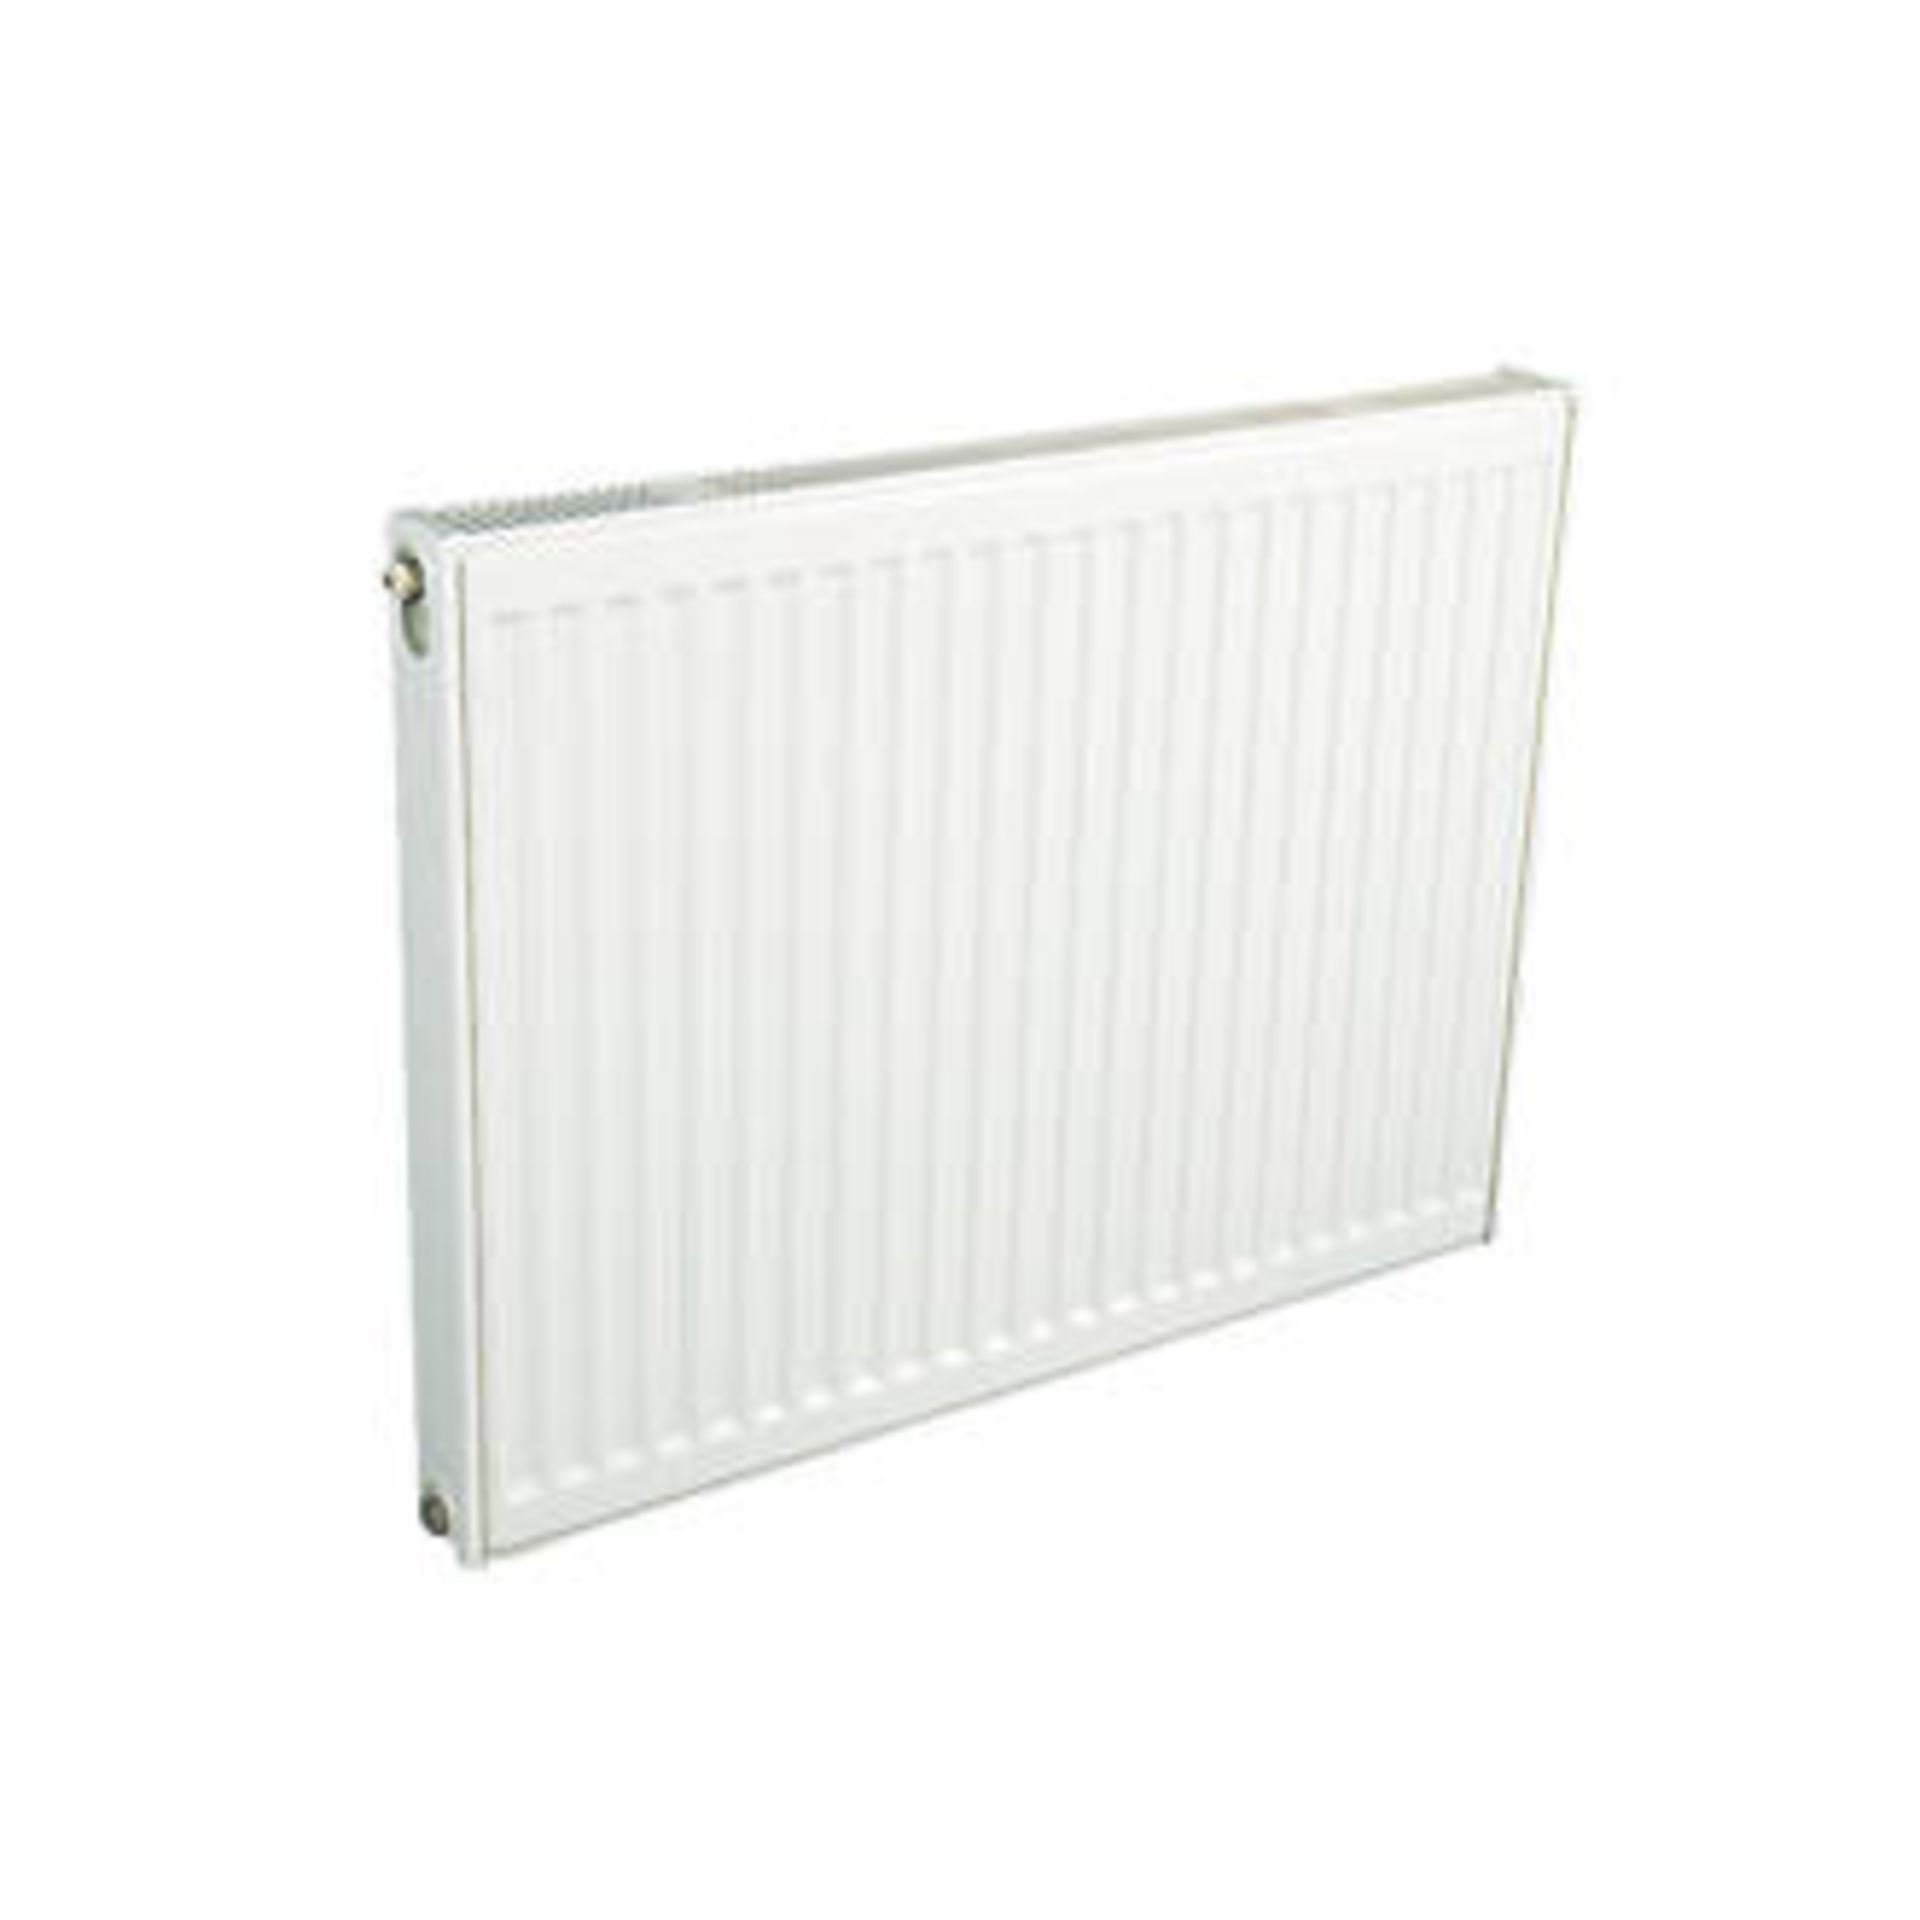 (RR135) 600x400mm Single-Panel Single Convector Radiator White. Horizontal. Suitable for(RR135) - Image 2 of 2